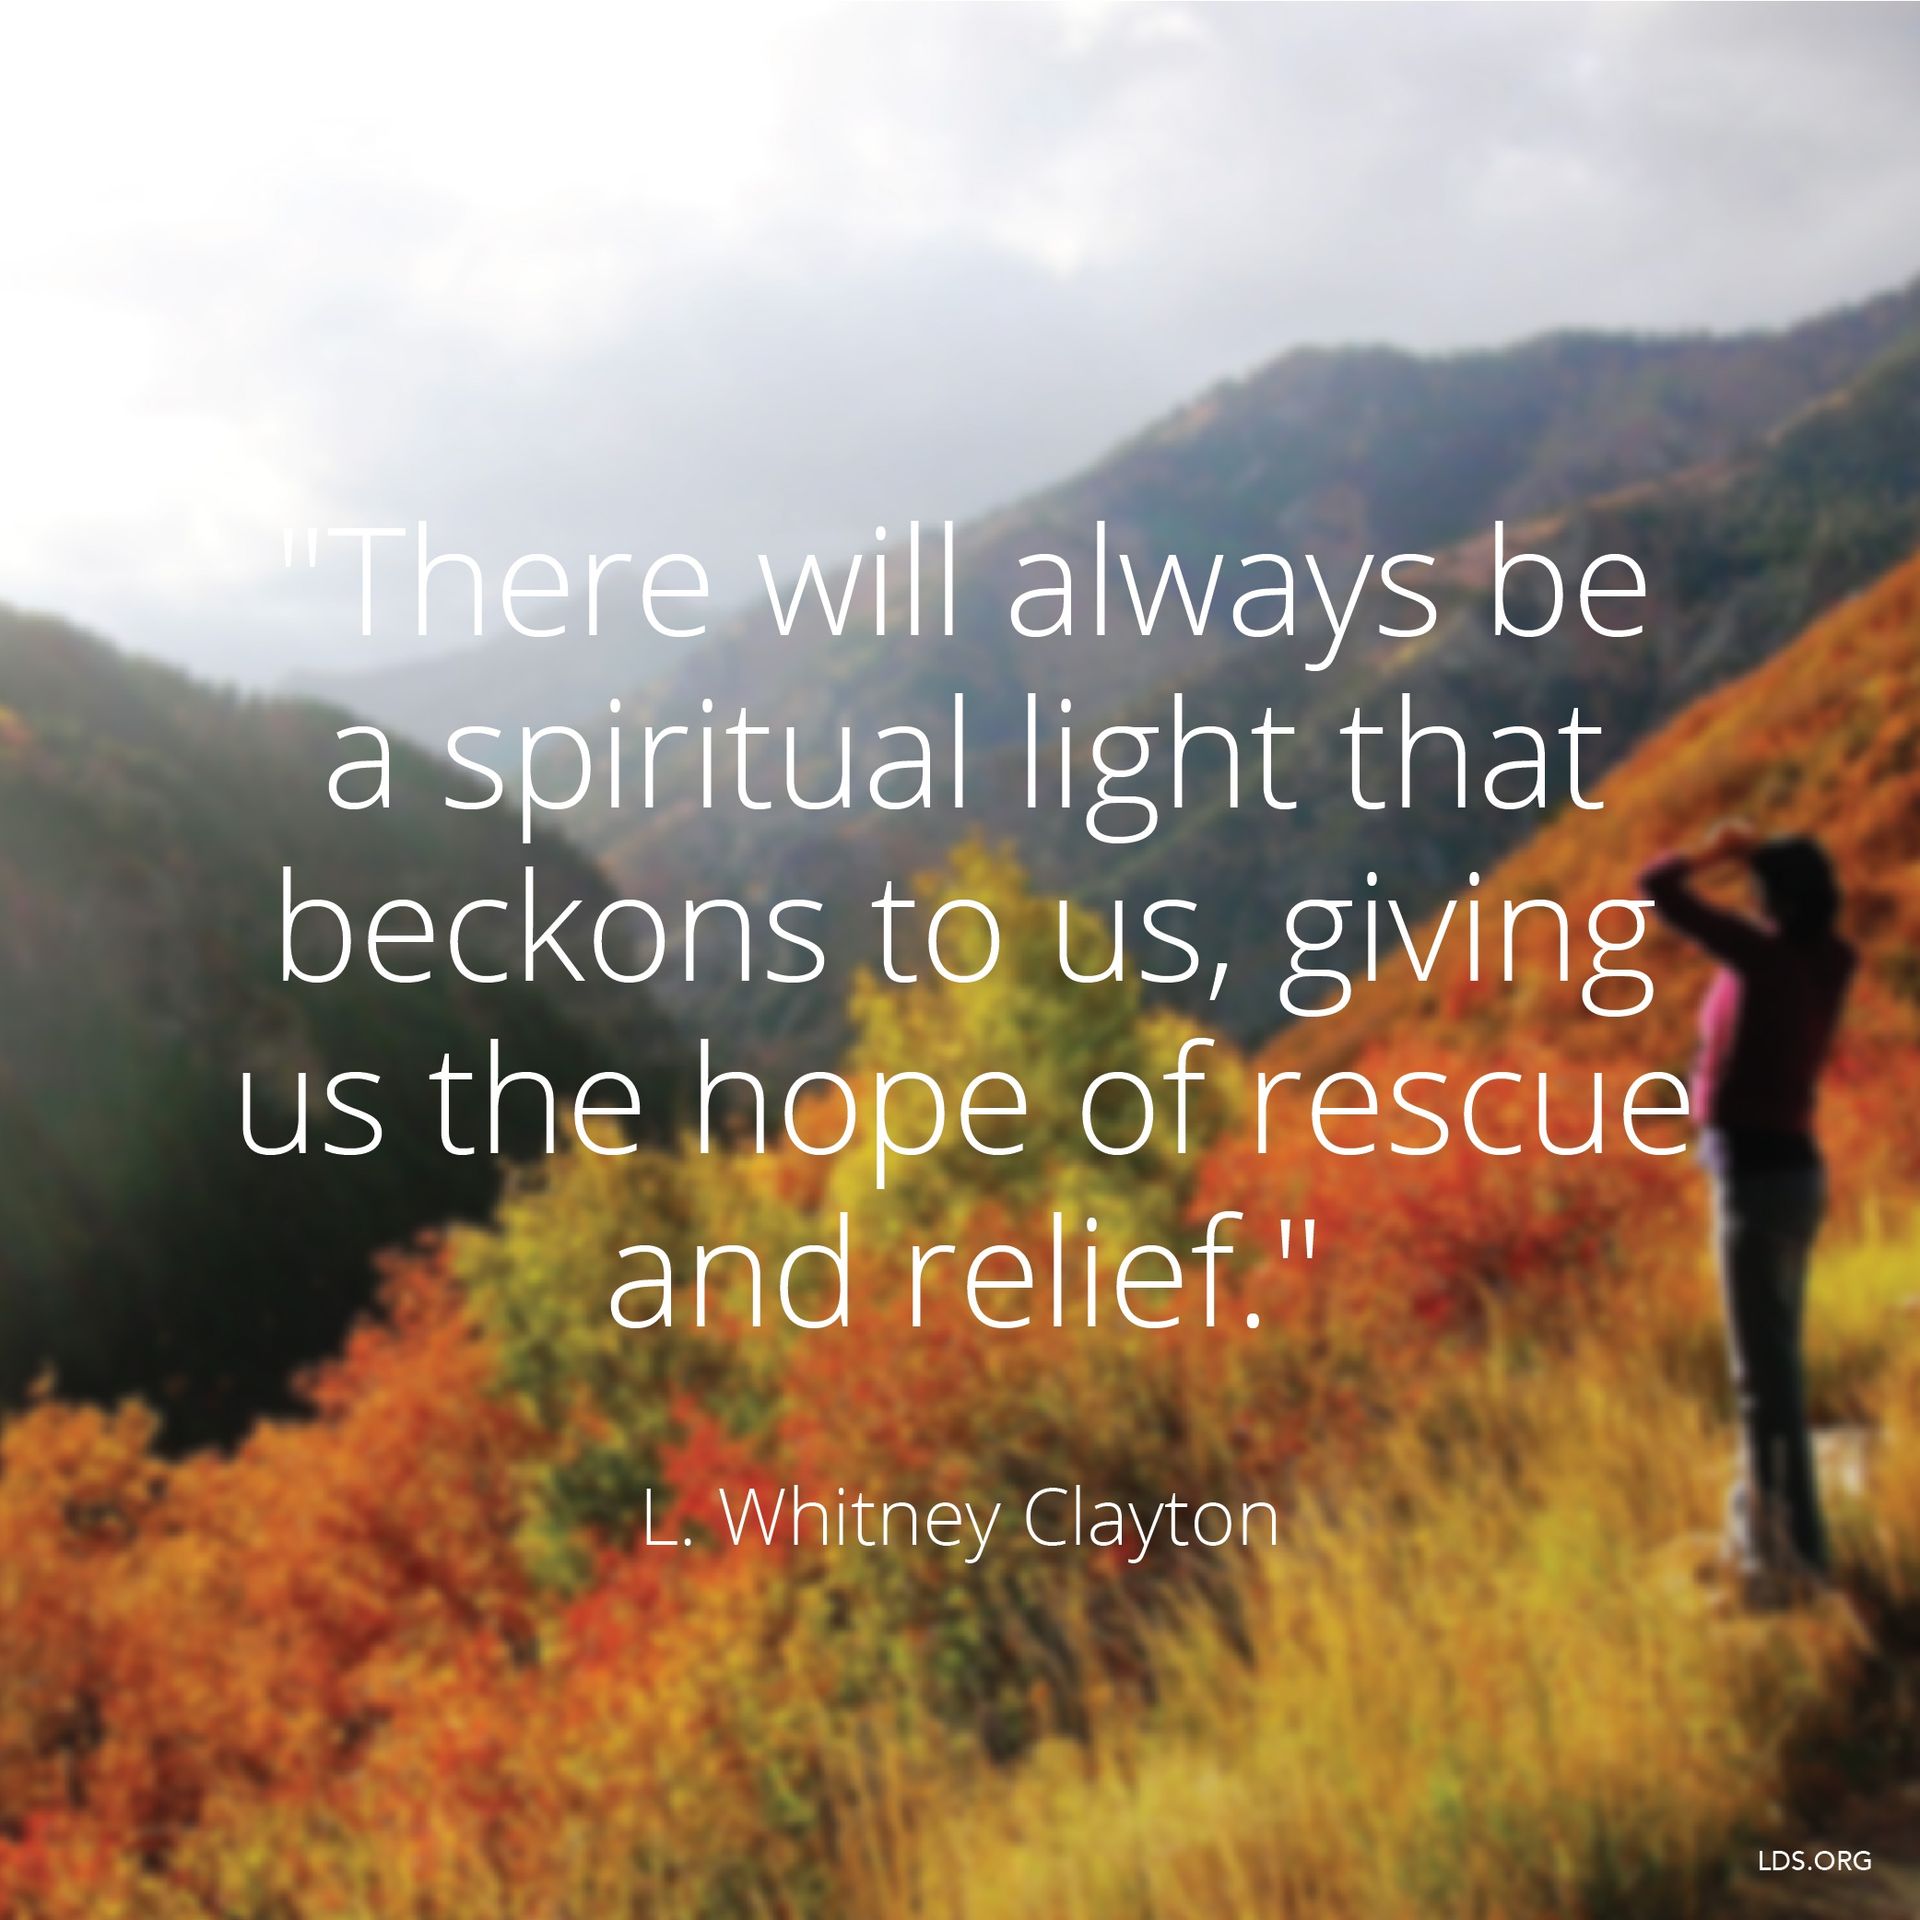 “There will always be a spiritual light that beckons to us, giving us the hope of rescue and relief.”—Elder L. Whitney Clayton, “Choose to Believe” © undefined ipCode 1.